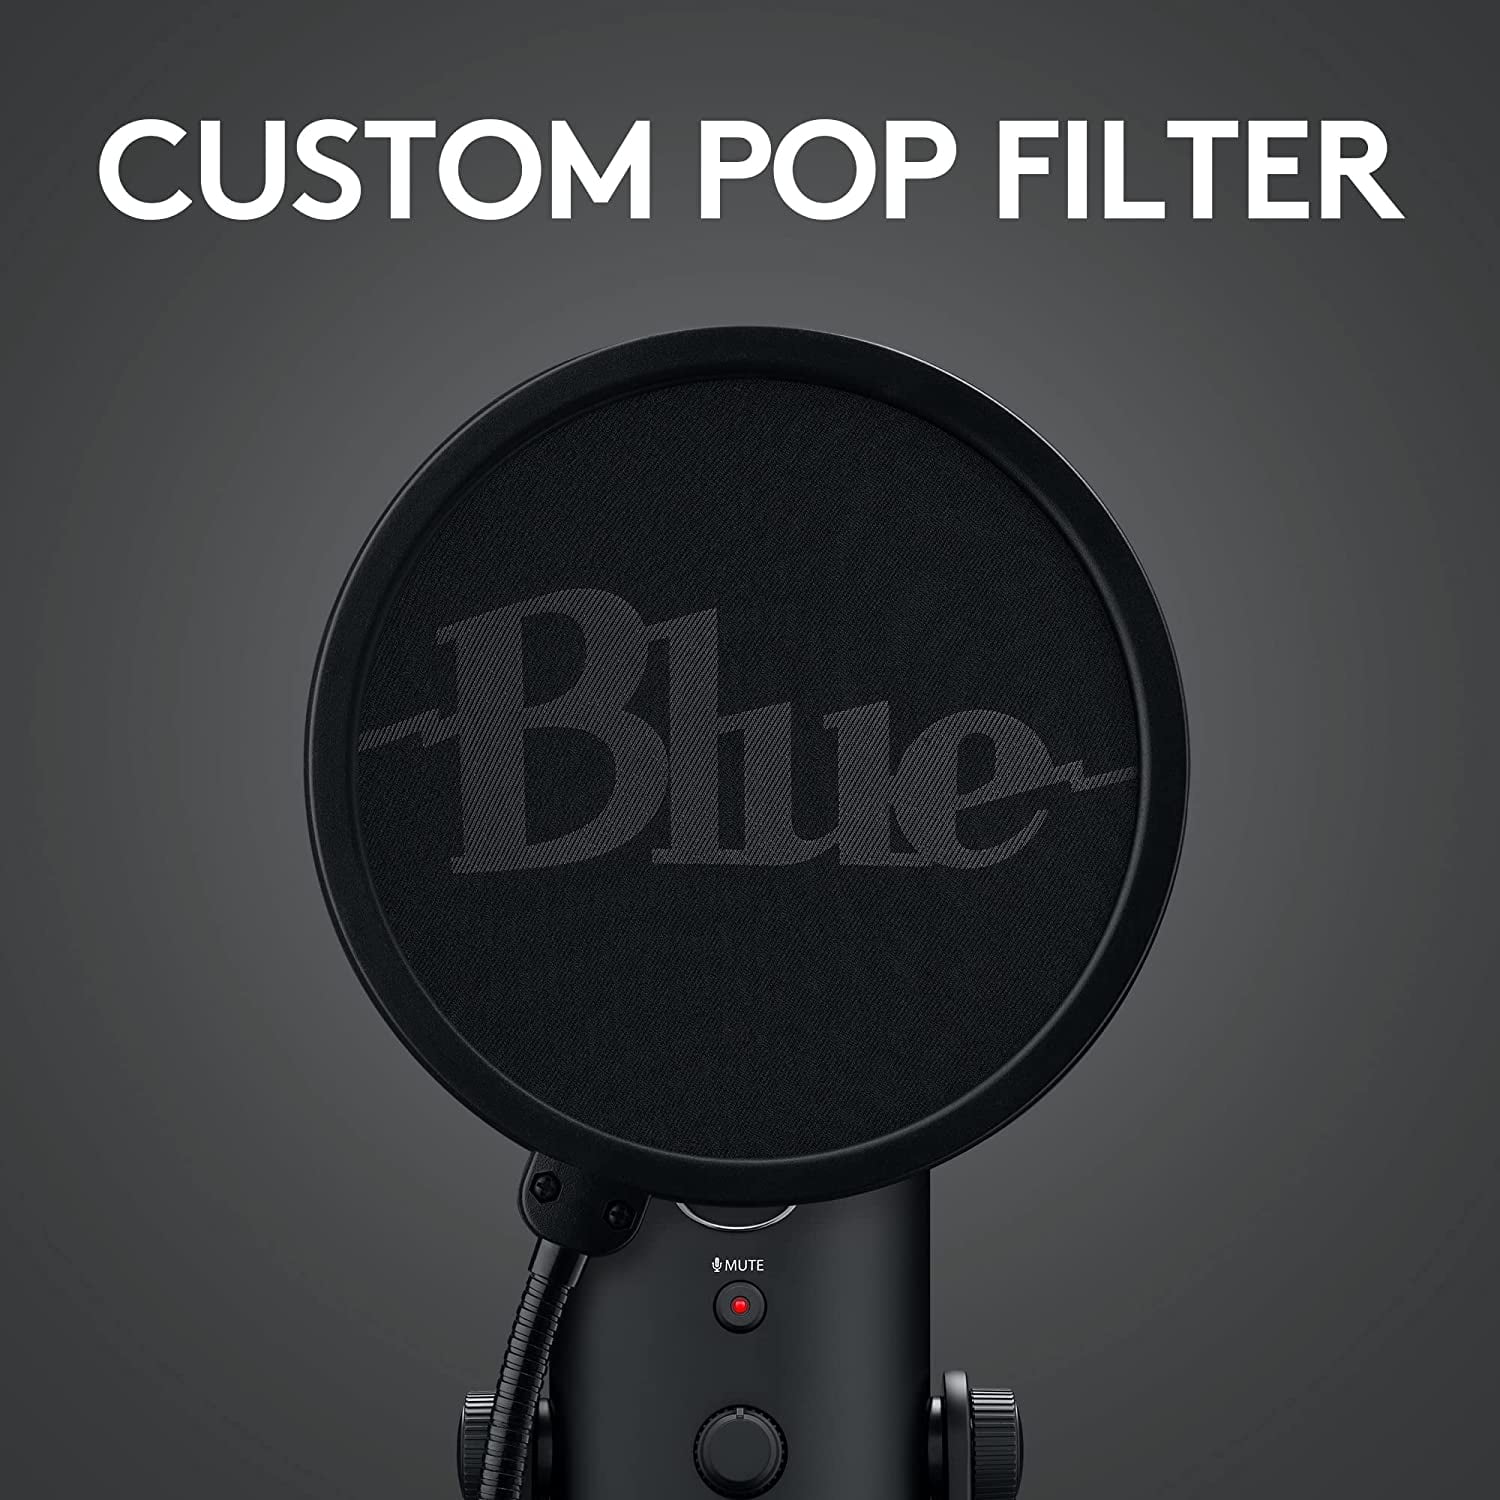 Logitech Blue Yeti Premium USB Gaming Microphone for Streaming, Blue VO!CE  Software, PC, Podcast, Studio, Computer Mic, Exclusive Streamlabs Themes,  Special Edition Finish - Pink Dawn 